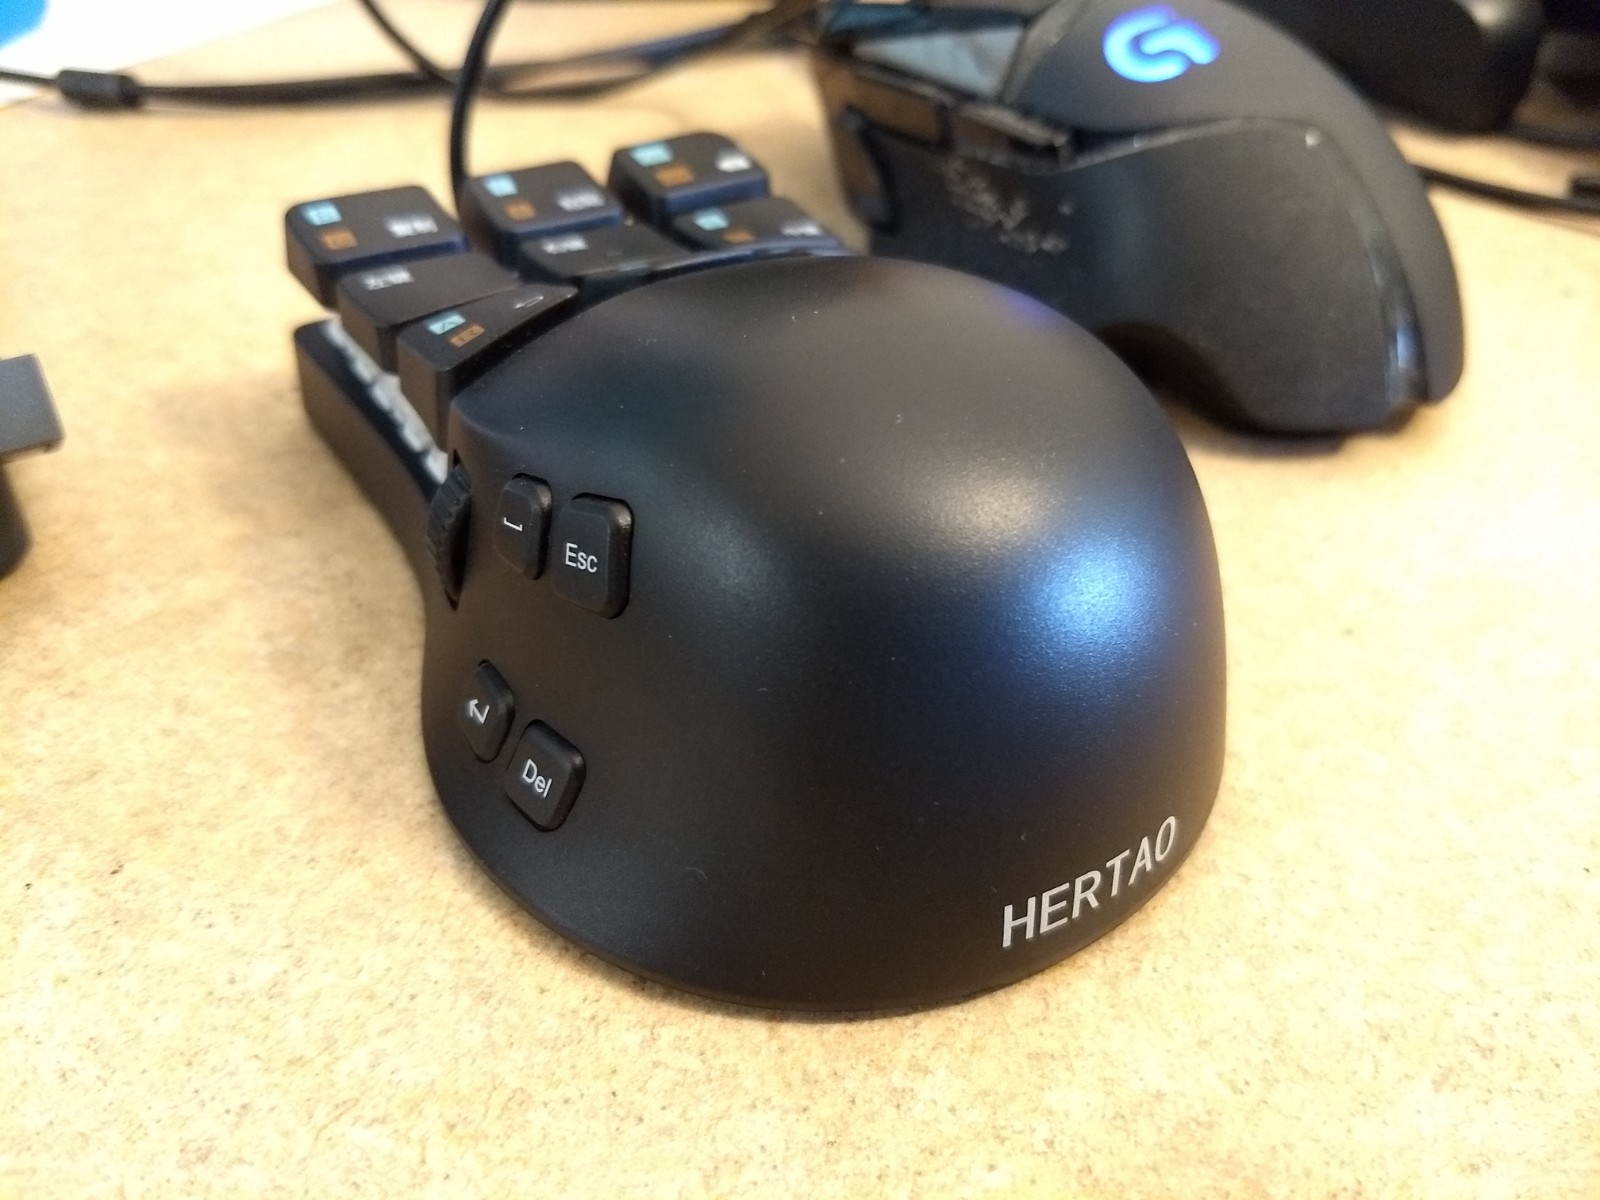 hertao mouse 20230507 114635668